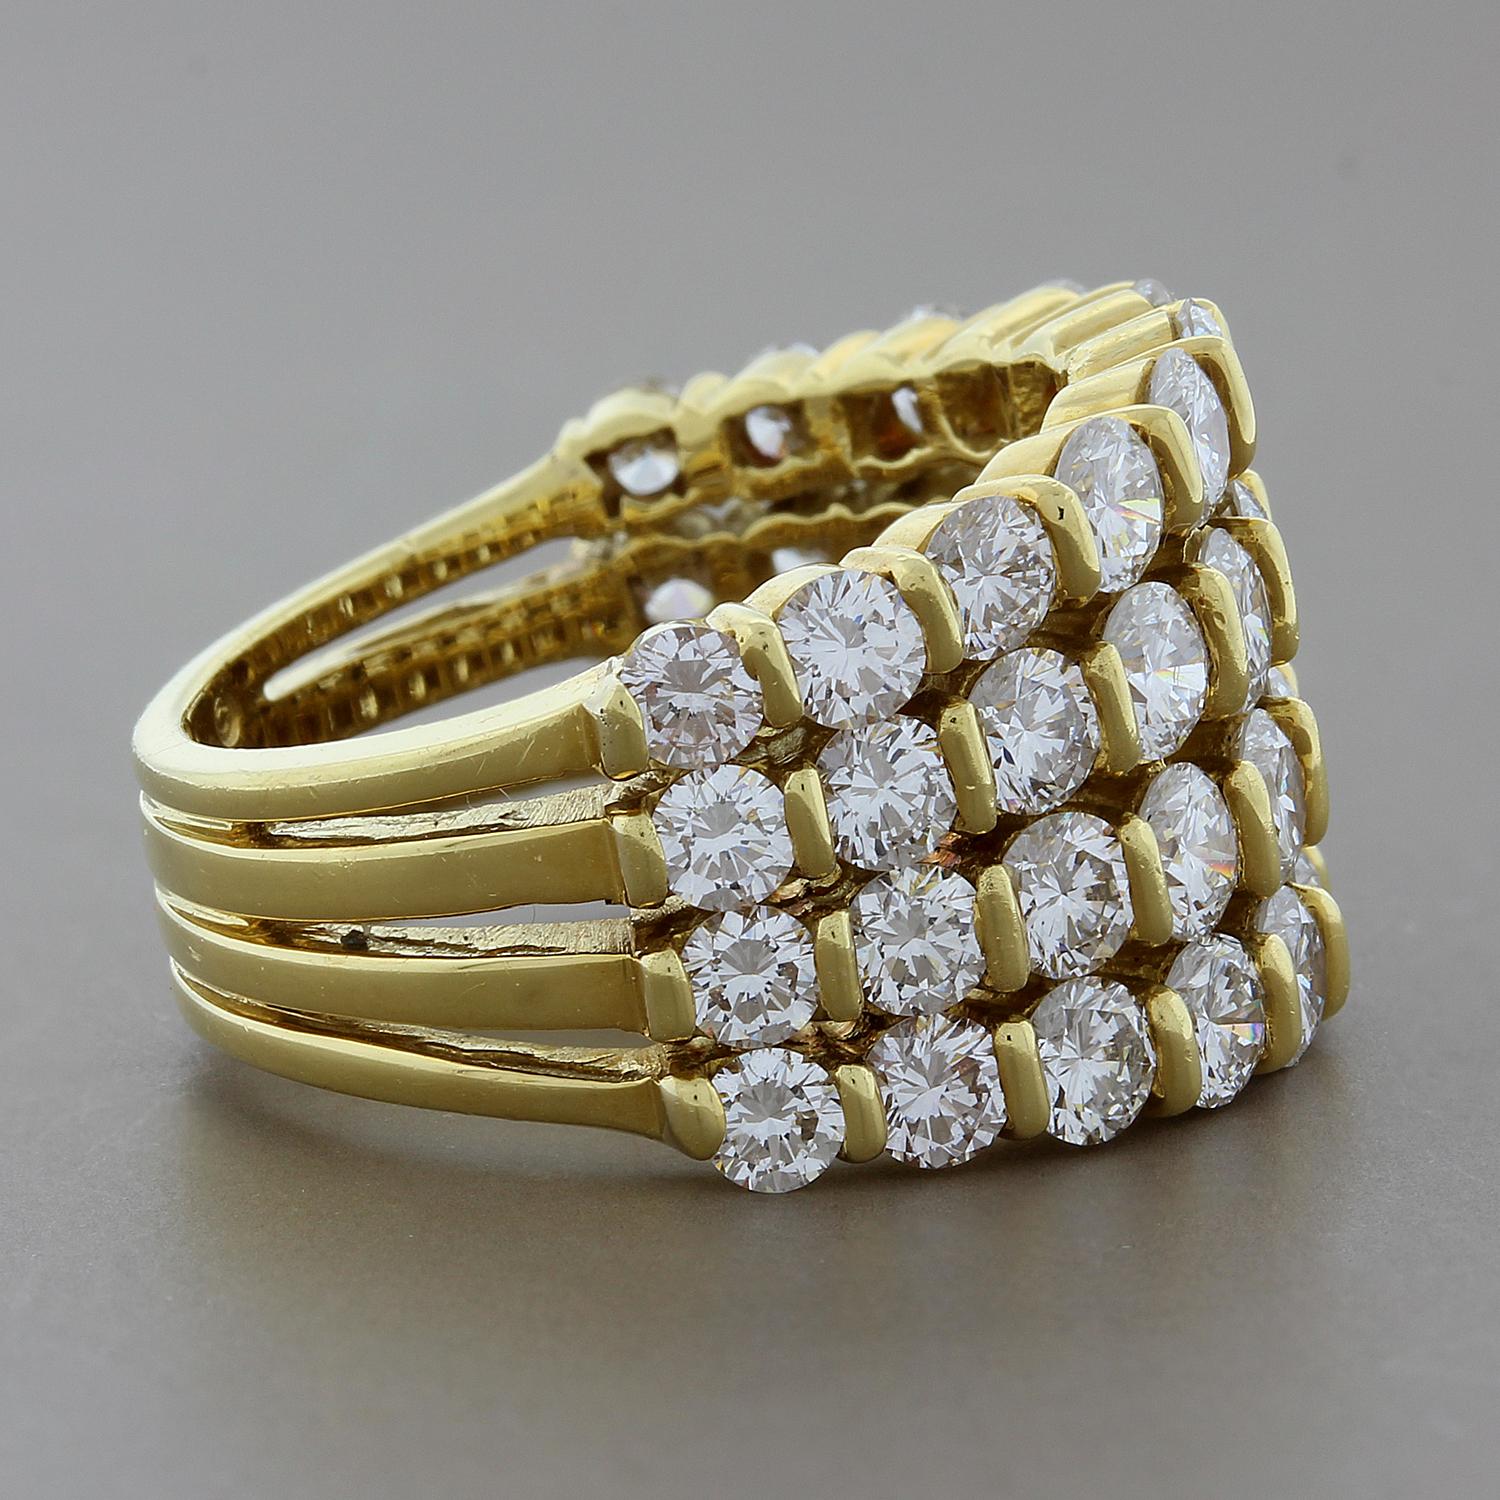 This brilliant band by Gemlok features 4.40 carats of round cut VS quality diamonds. Each diamond is uniquely channel set in 18K yellow gold on four bands that merge into one seamlessly finished band. The diamonds are set half-circle for a